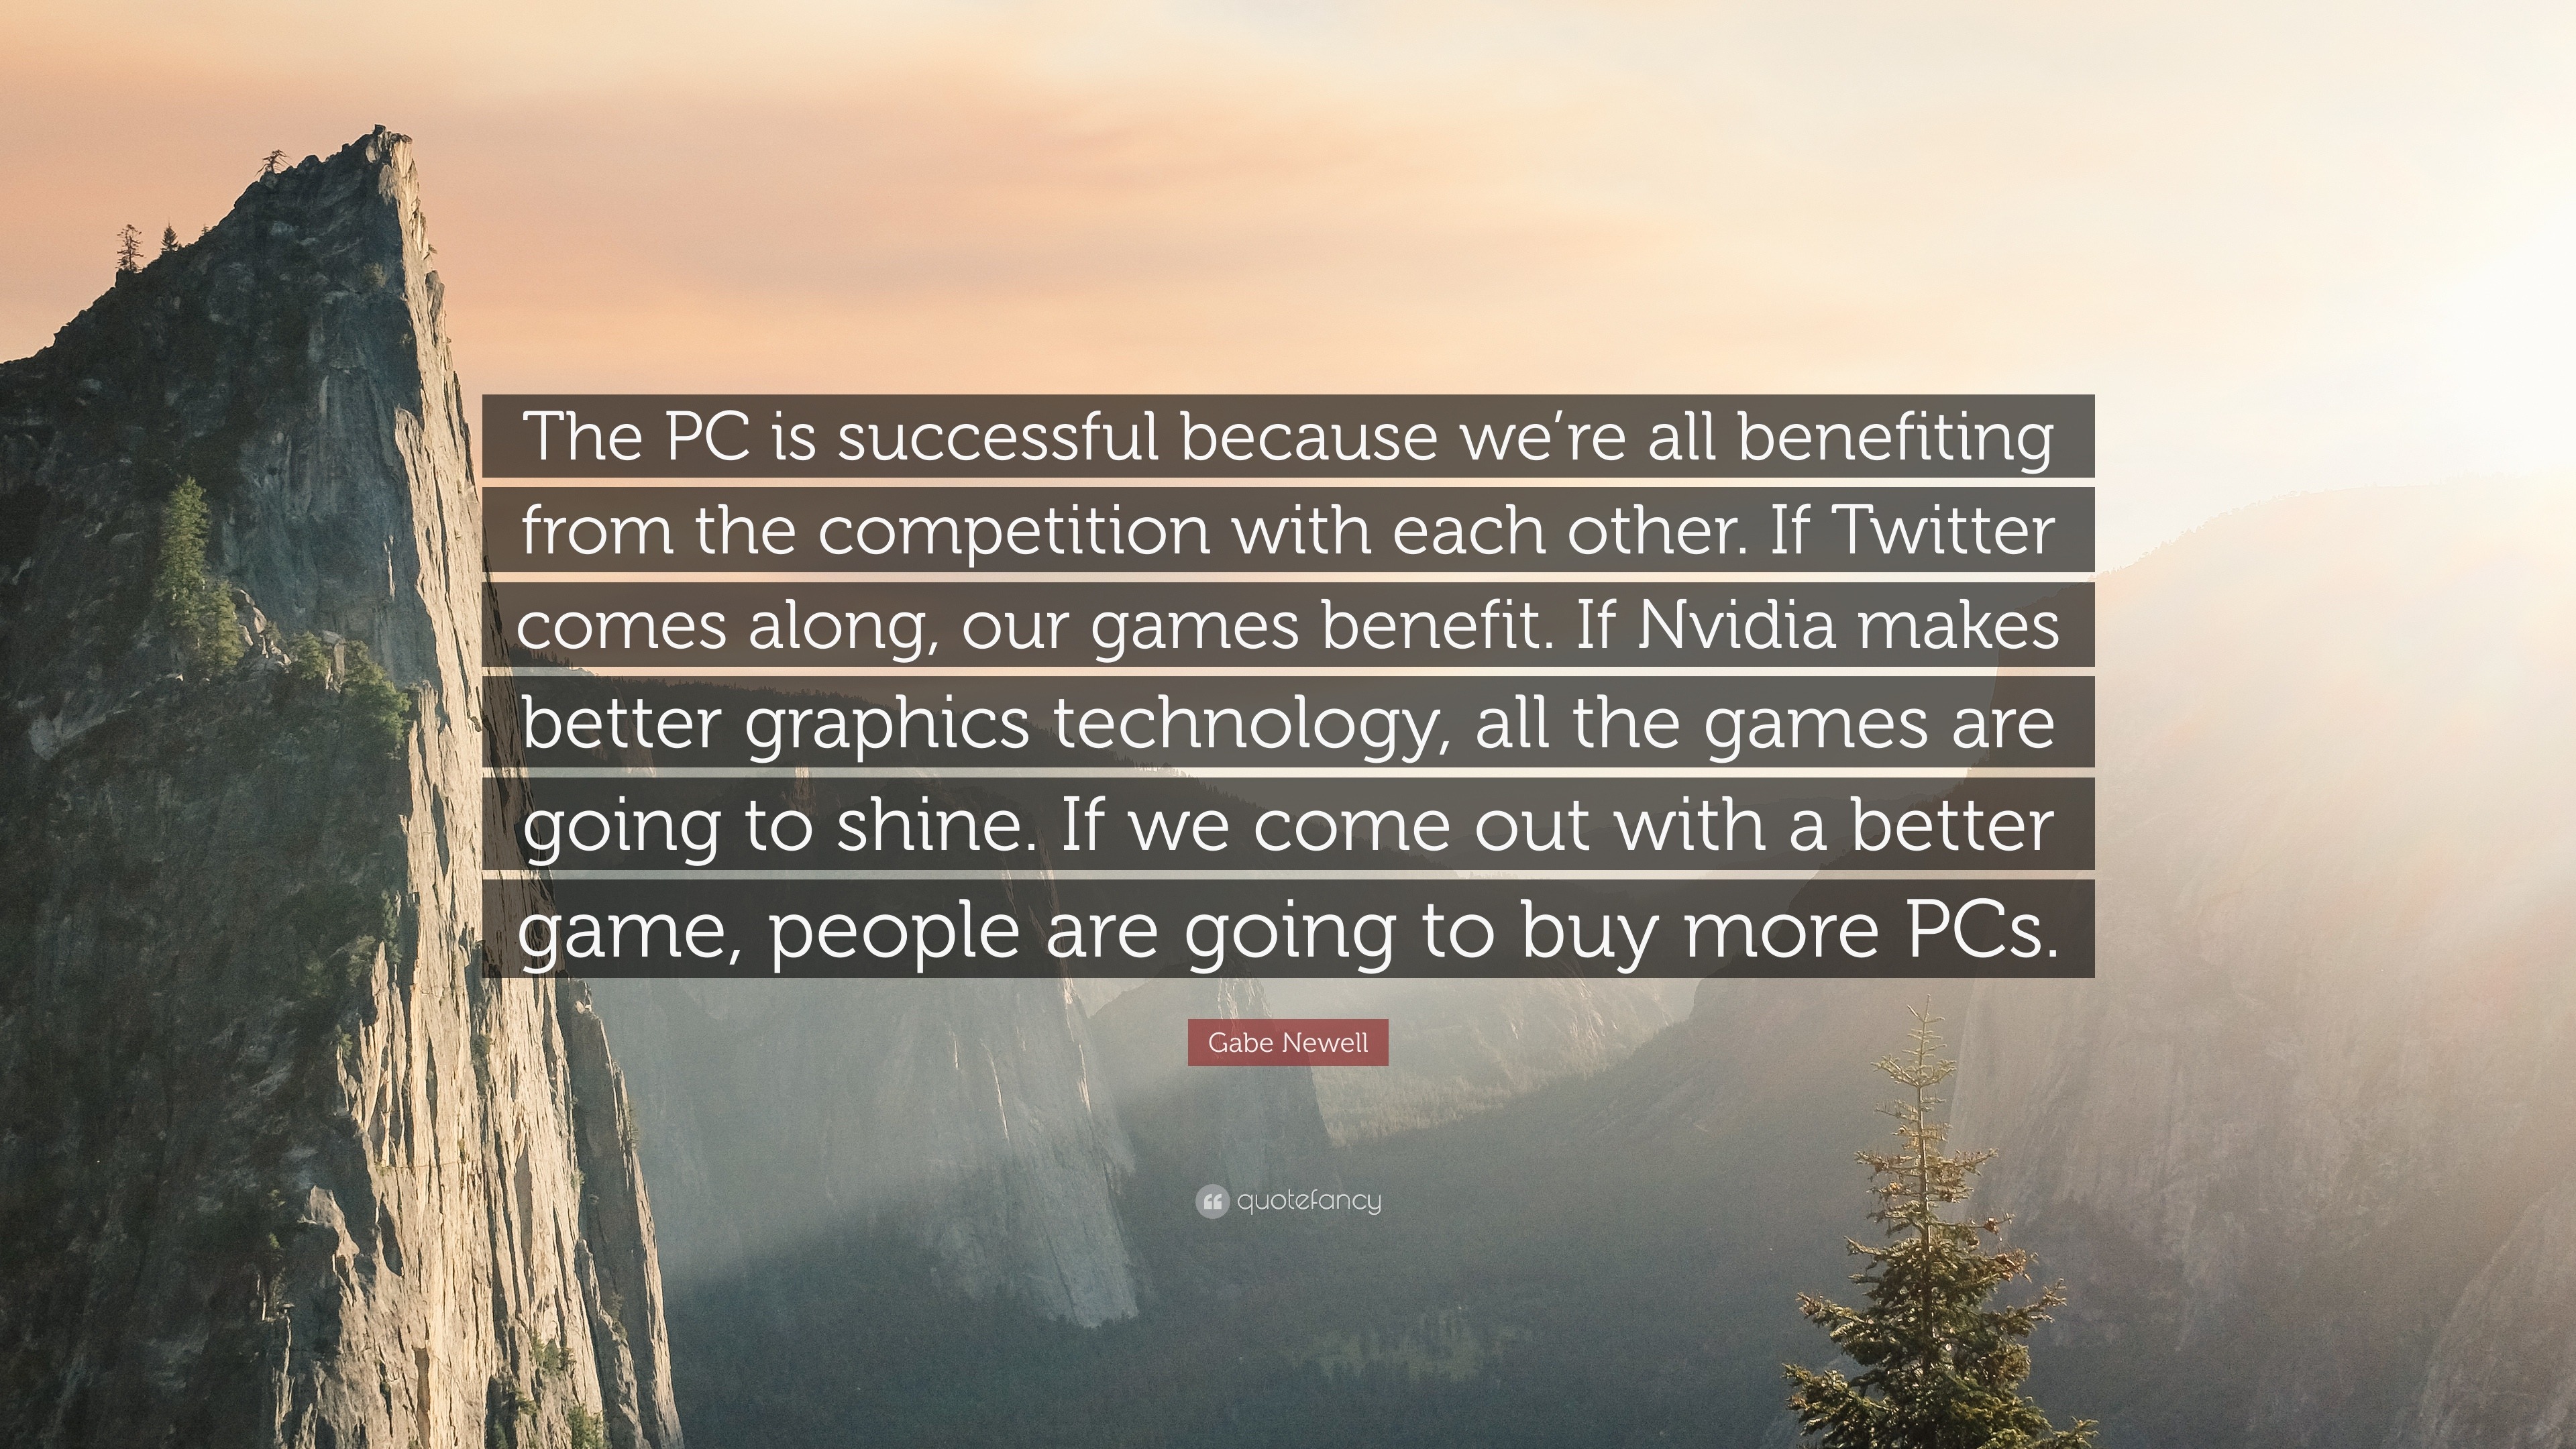 Gabe Newell Quote: “The PC is successful because we're all benefiting from  the competition with each other. If Twitter comes along, our game”